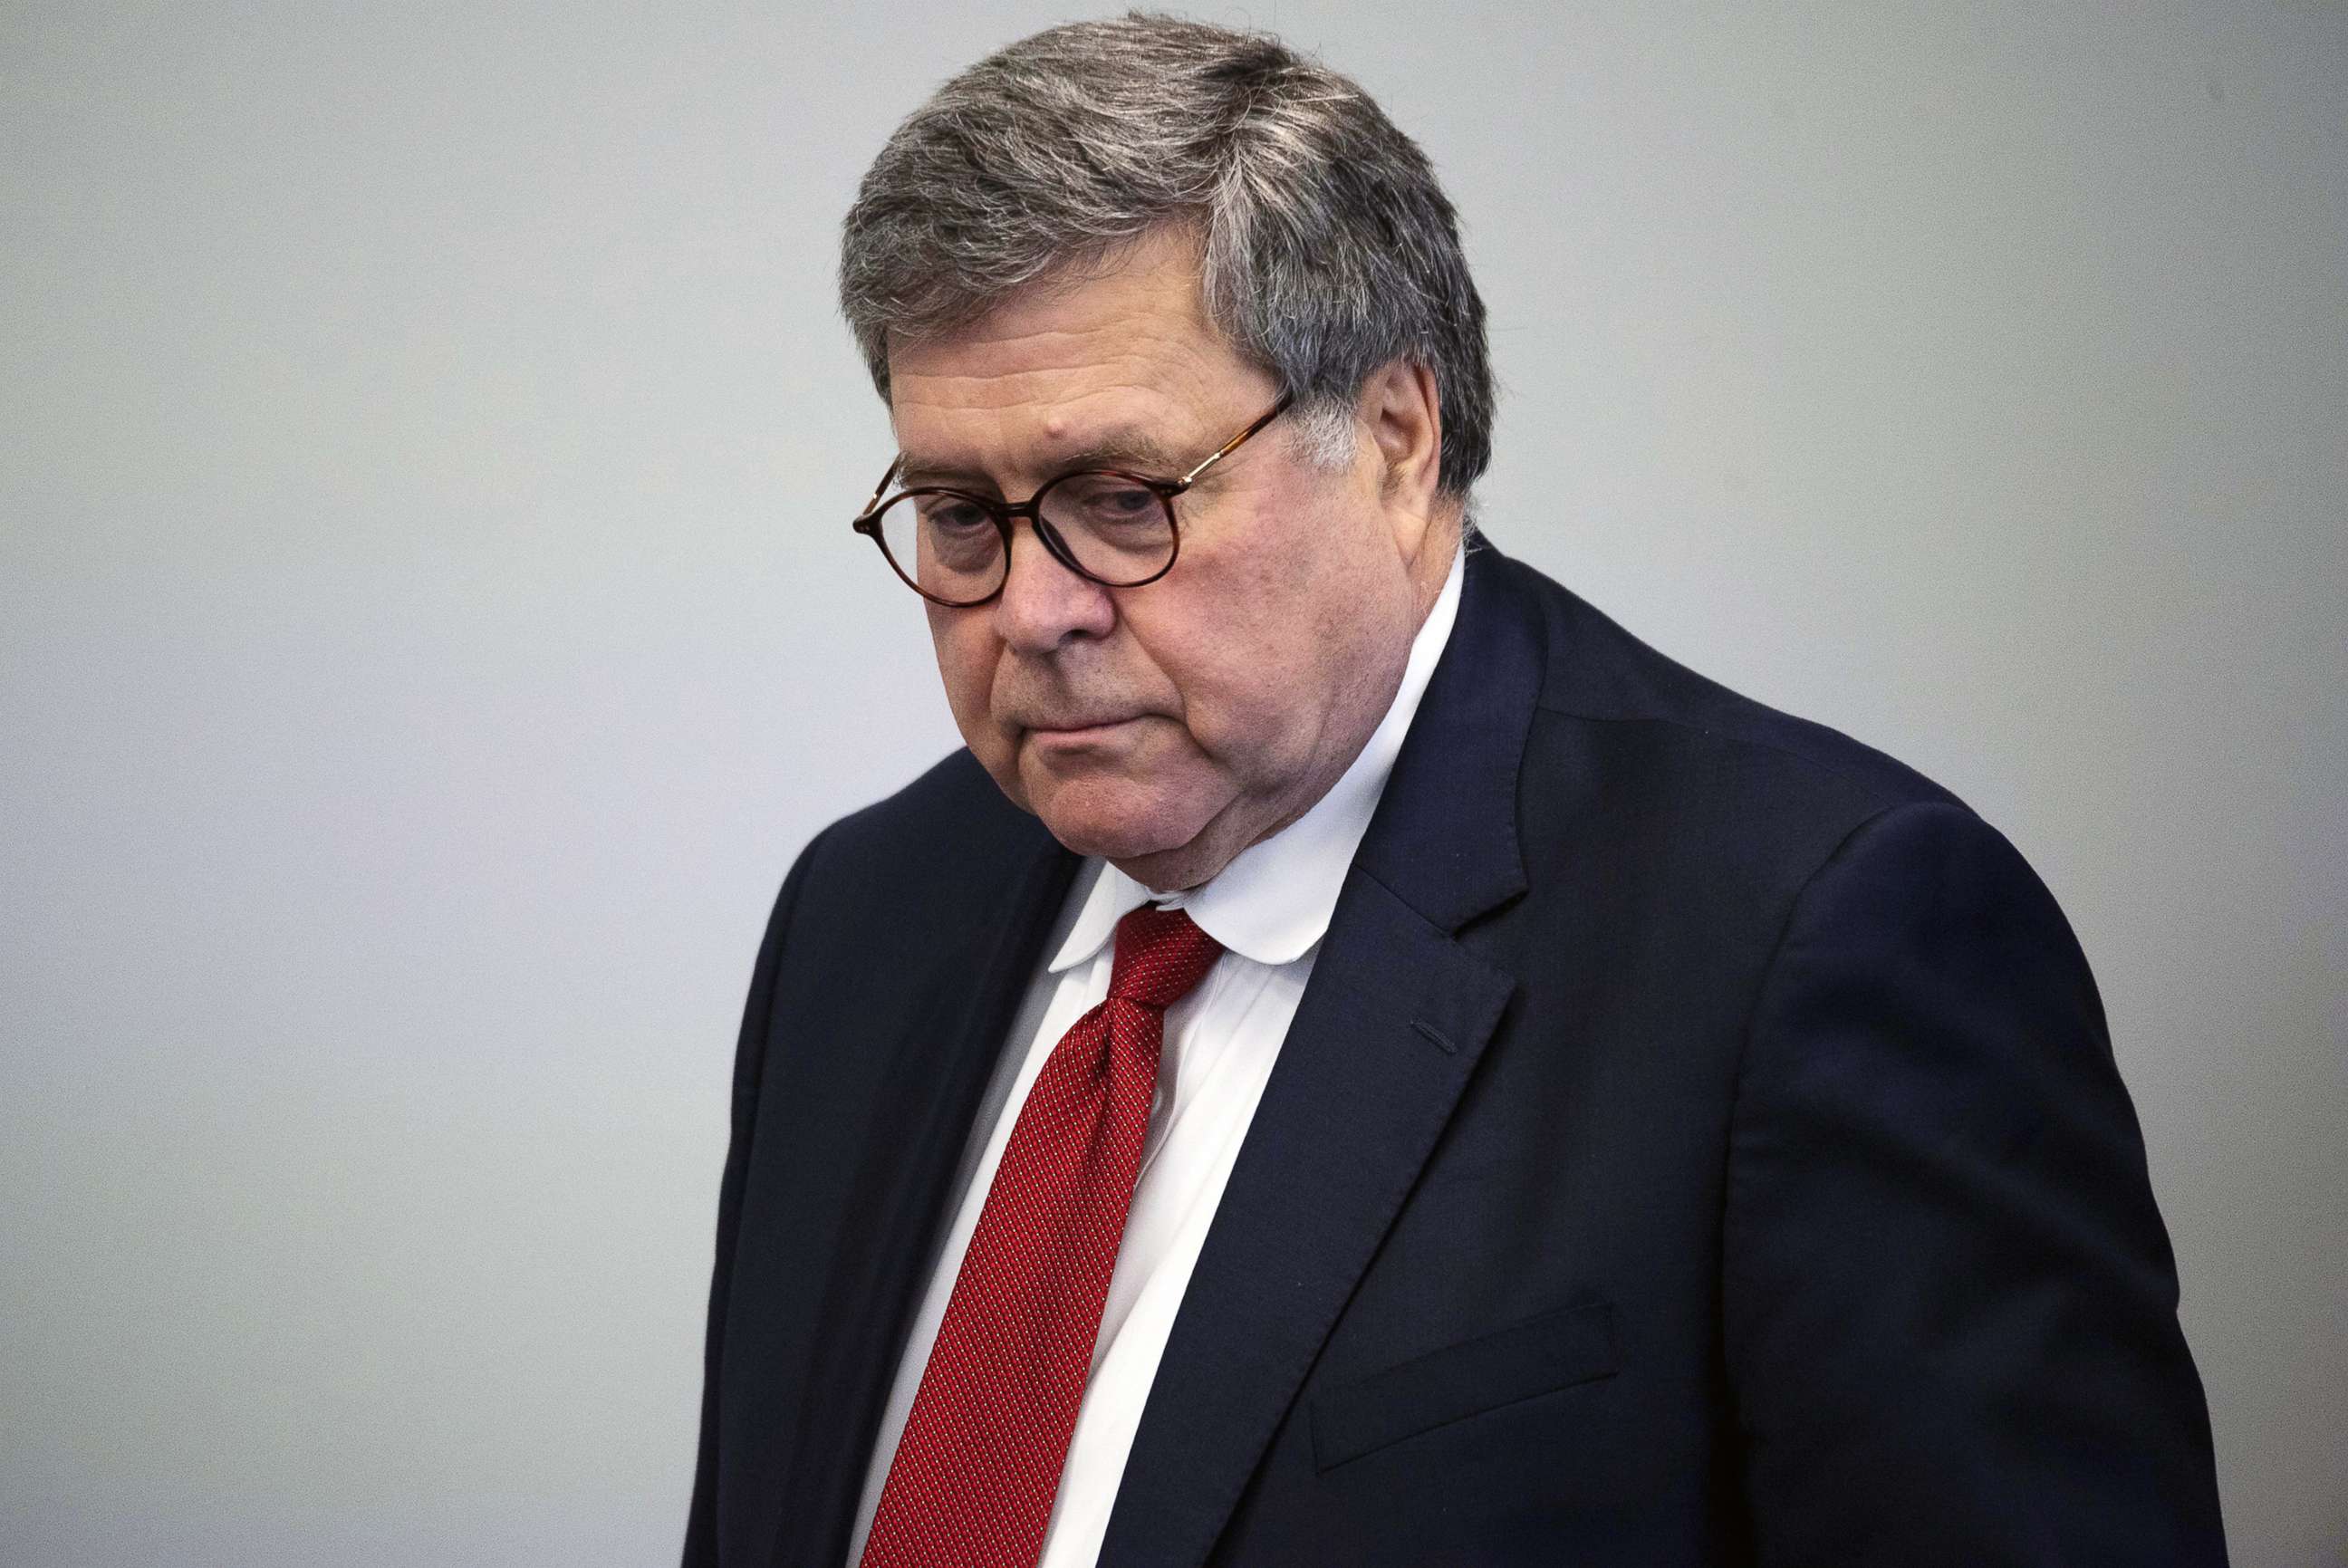 PHOTO: William Barr arrives for a discussion with law enforcement in Wichita, Kan., Oct. 2, 2019.